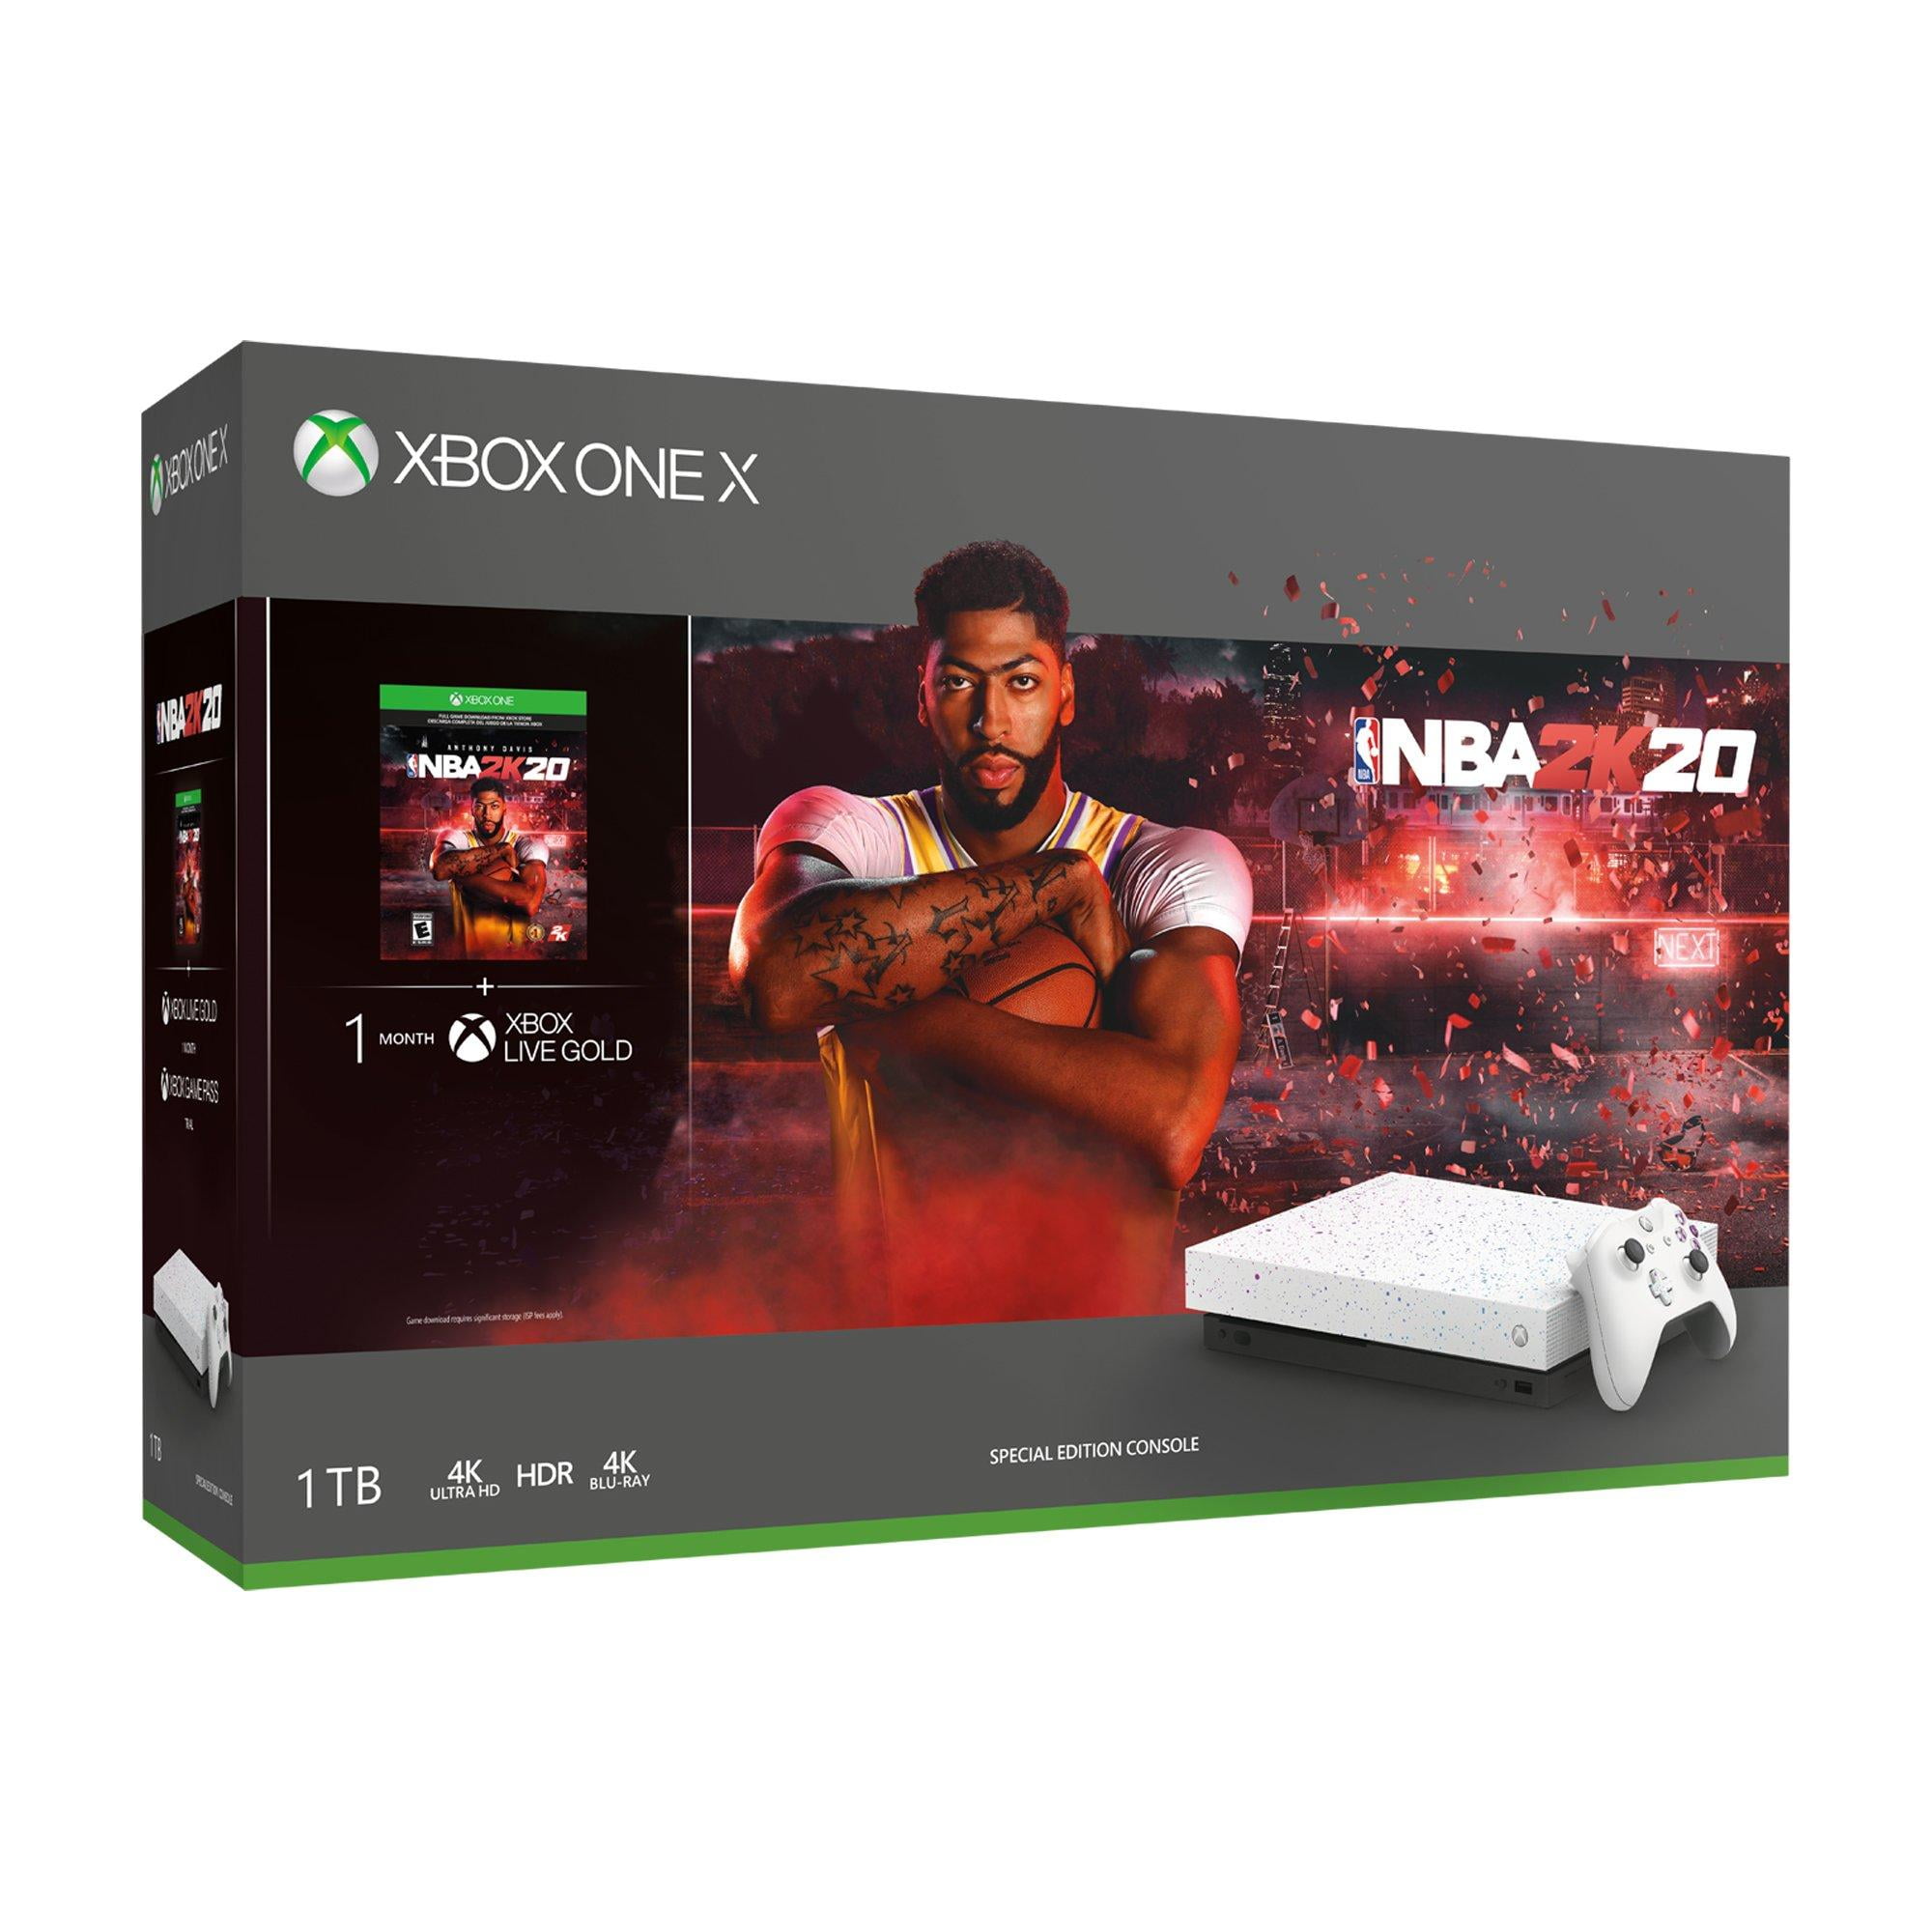 Microsoft Xbox One X 1TB SSD Enhanced NBA 2K20 Hyperspace Limited Edition White Night Sky Console, NBA 2K20 Full Game, 1 Month Xbox Live Gold and Game Pass Bundle Walmart Canada